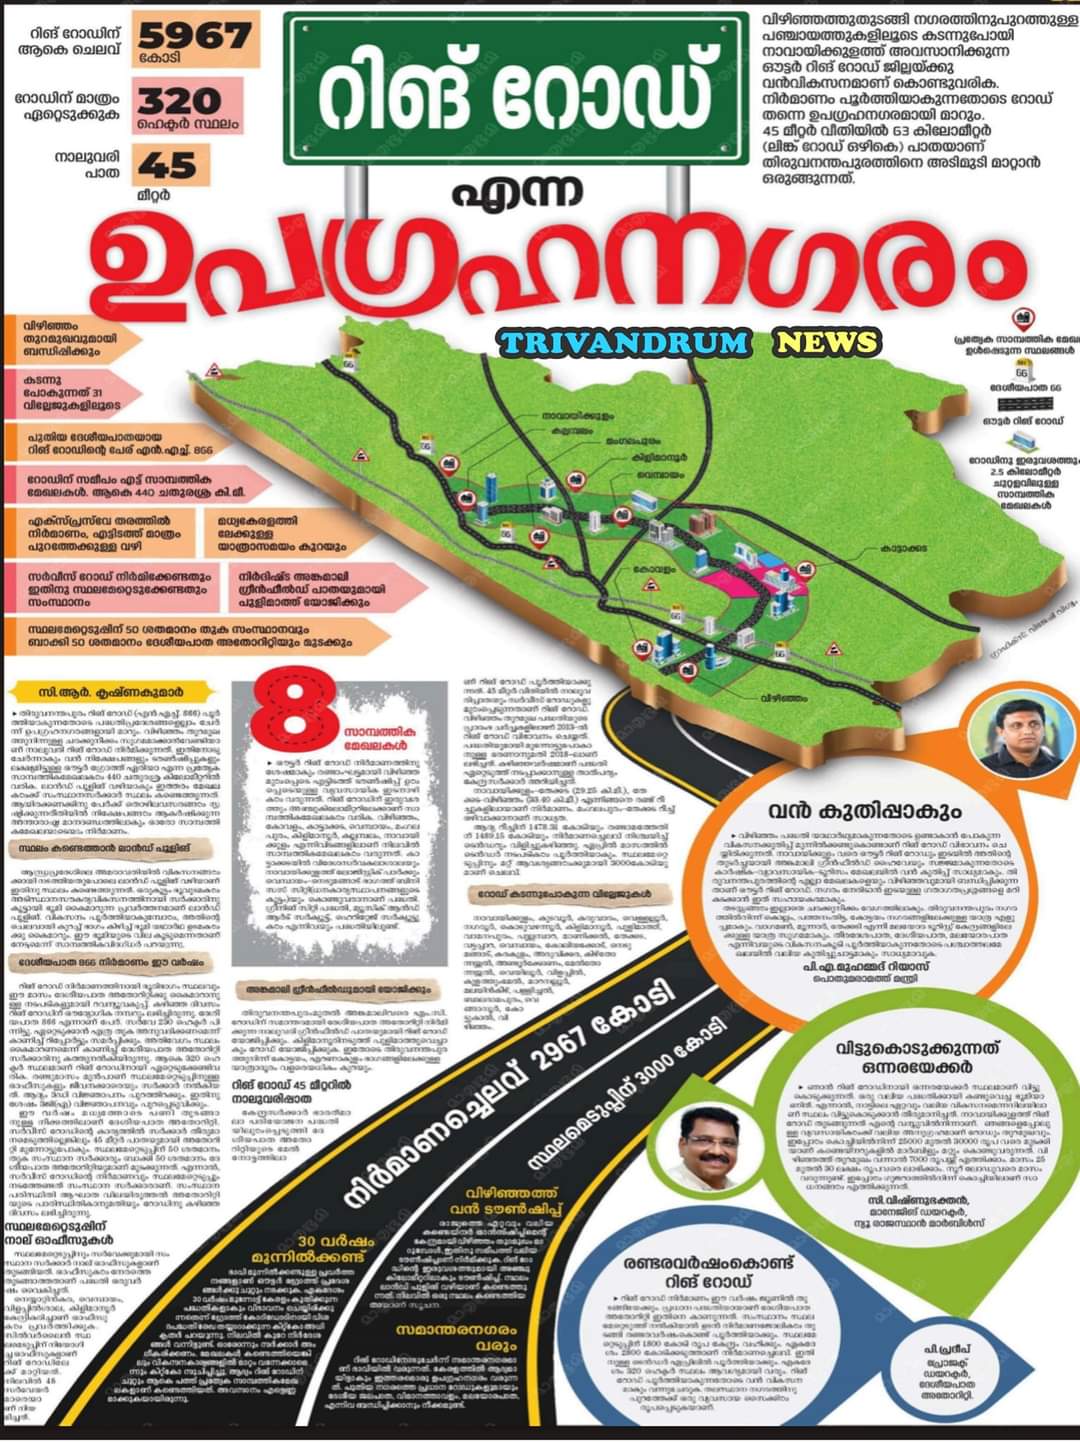 Final call on proposed outer ring road in Thiruvananthapuram soon